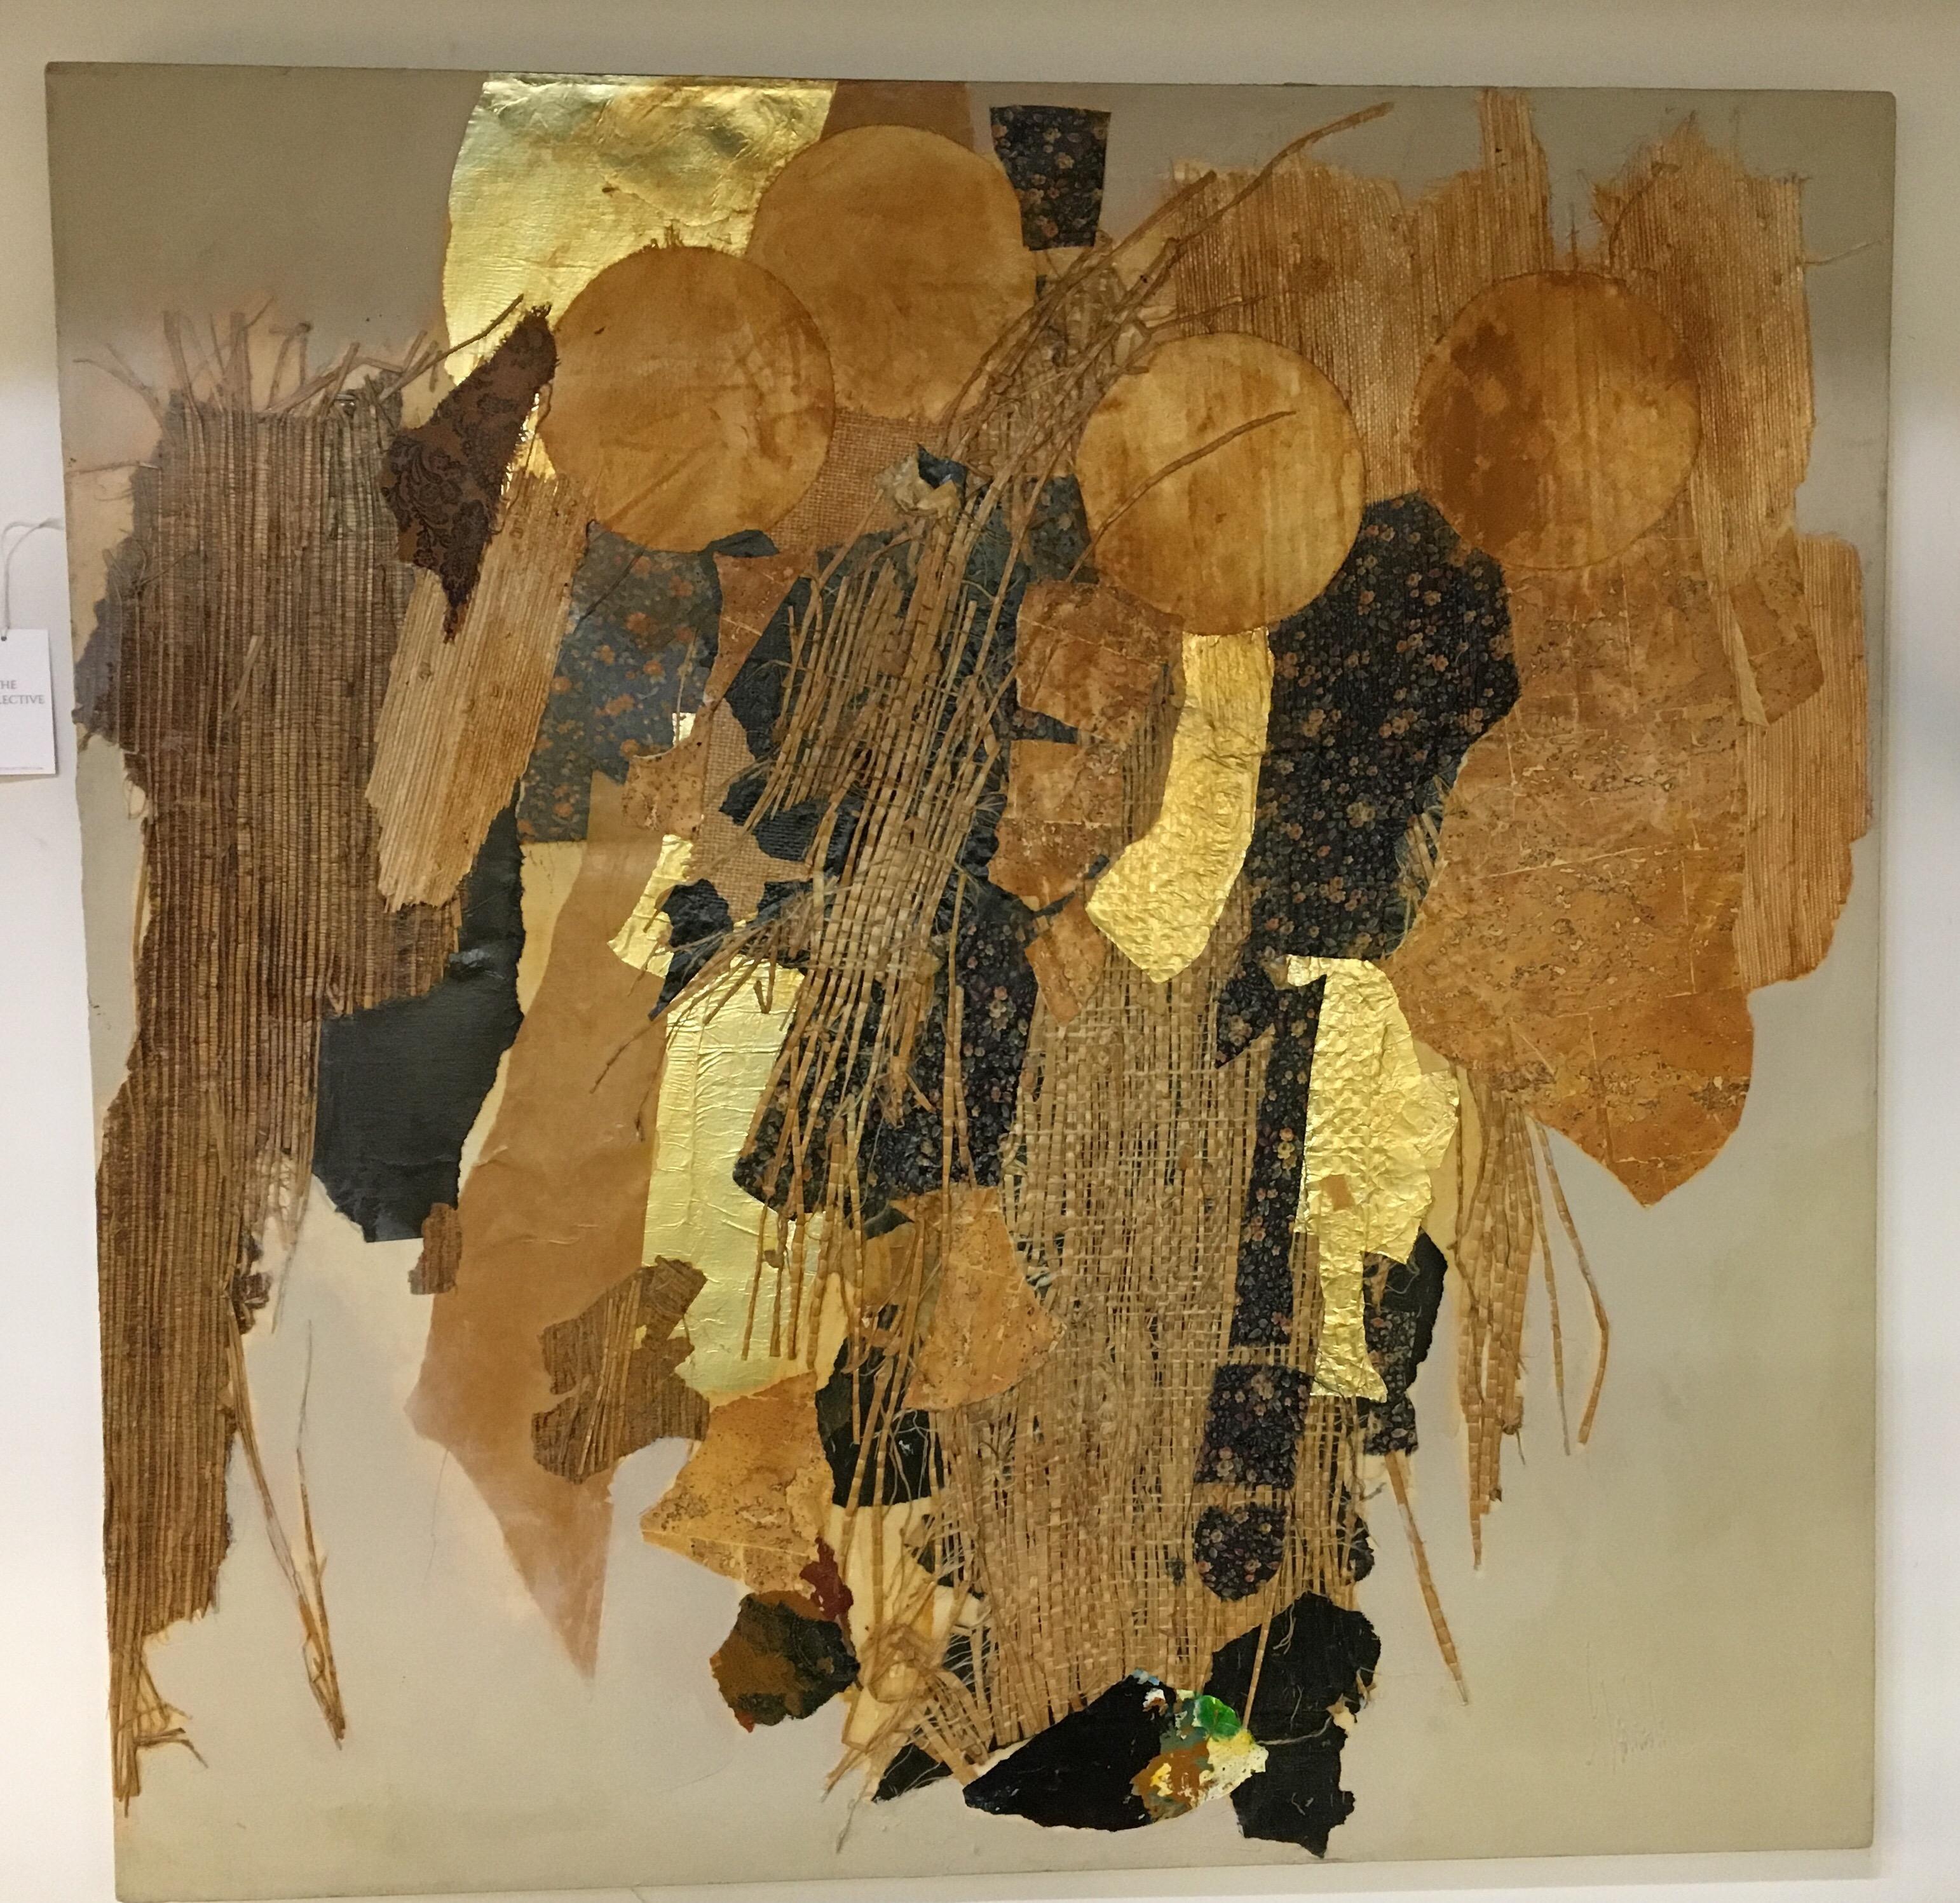 Part of a suite of four original mixed-media paintings, this one being the largest. The artist's signature is on the lower part of the canvas but is illegible. We have been told that these original works of art hung at the Parsons School of Design